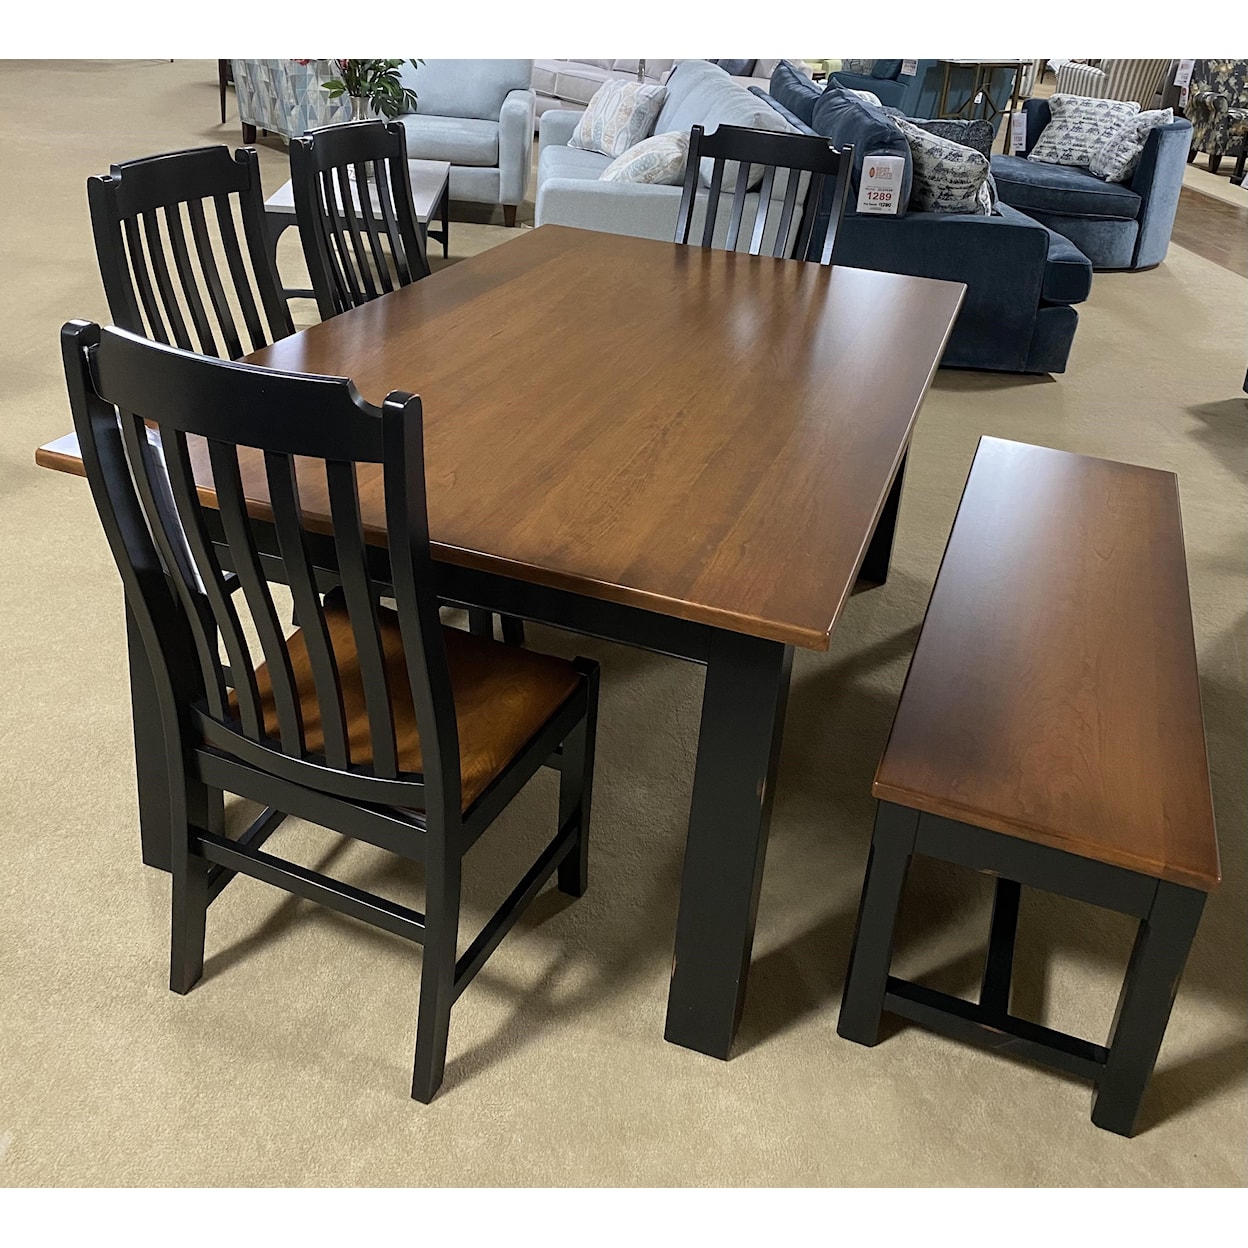 Zimmerman Chair Dining 6 Pc Dining Group